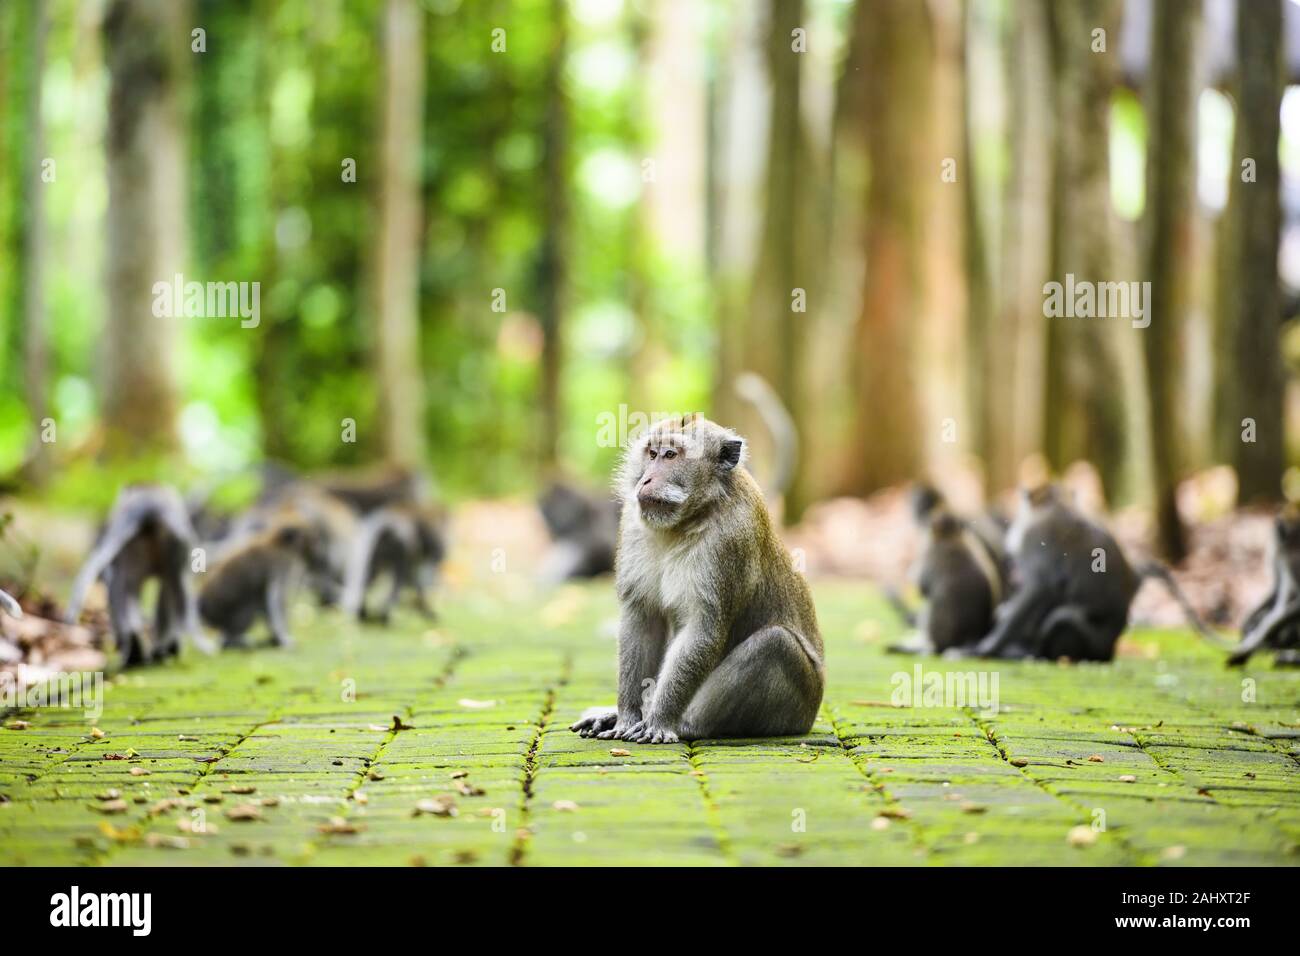 A long-tailed macaque is sitting on a footpath in the Ubud Monkey Forest. Stock Photo